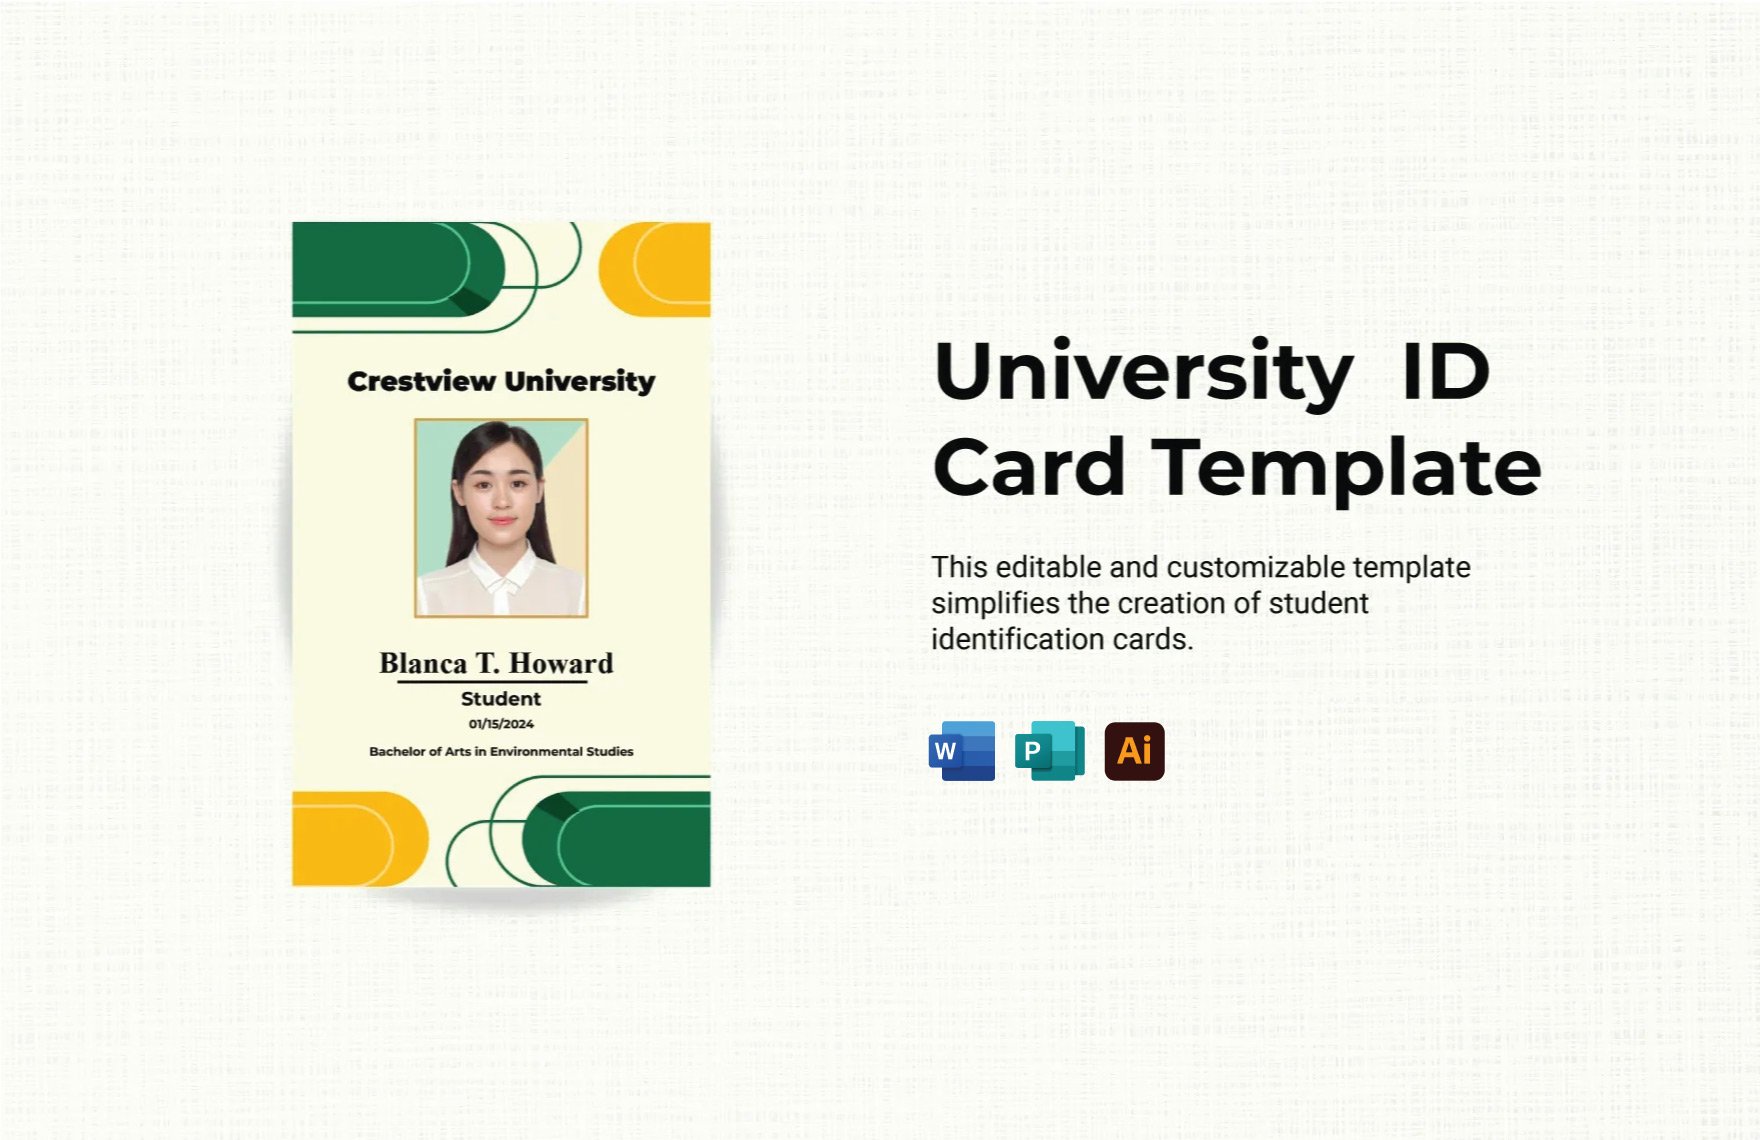 University ID Card Template in Word, Illustrator, Publisher